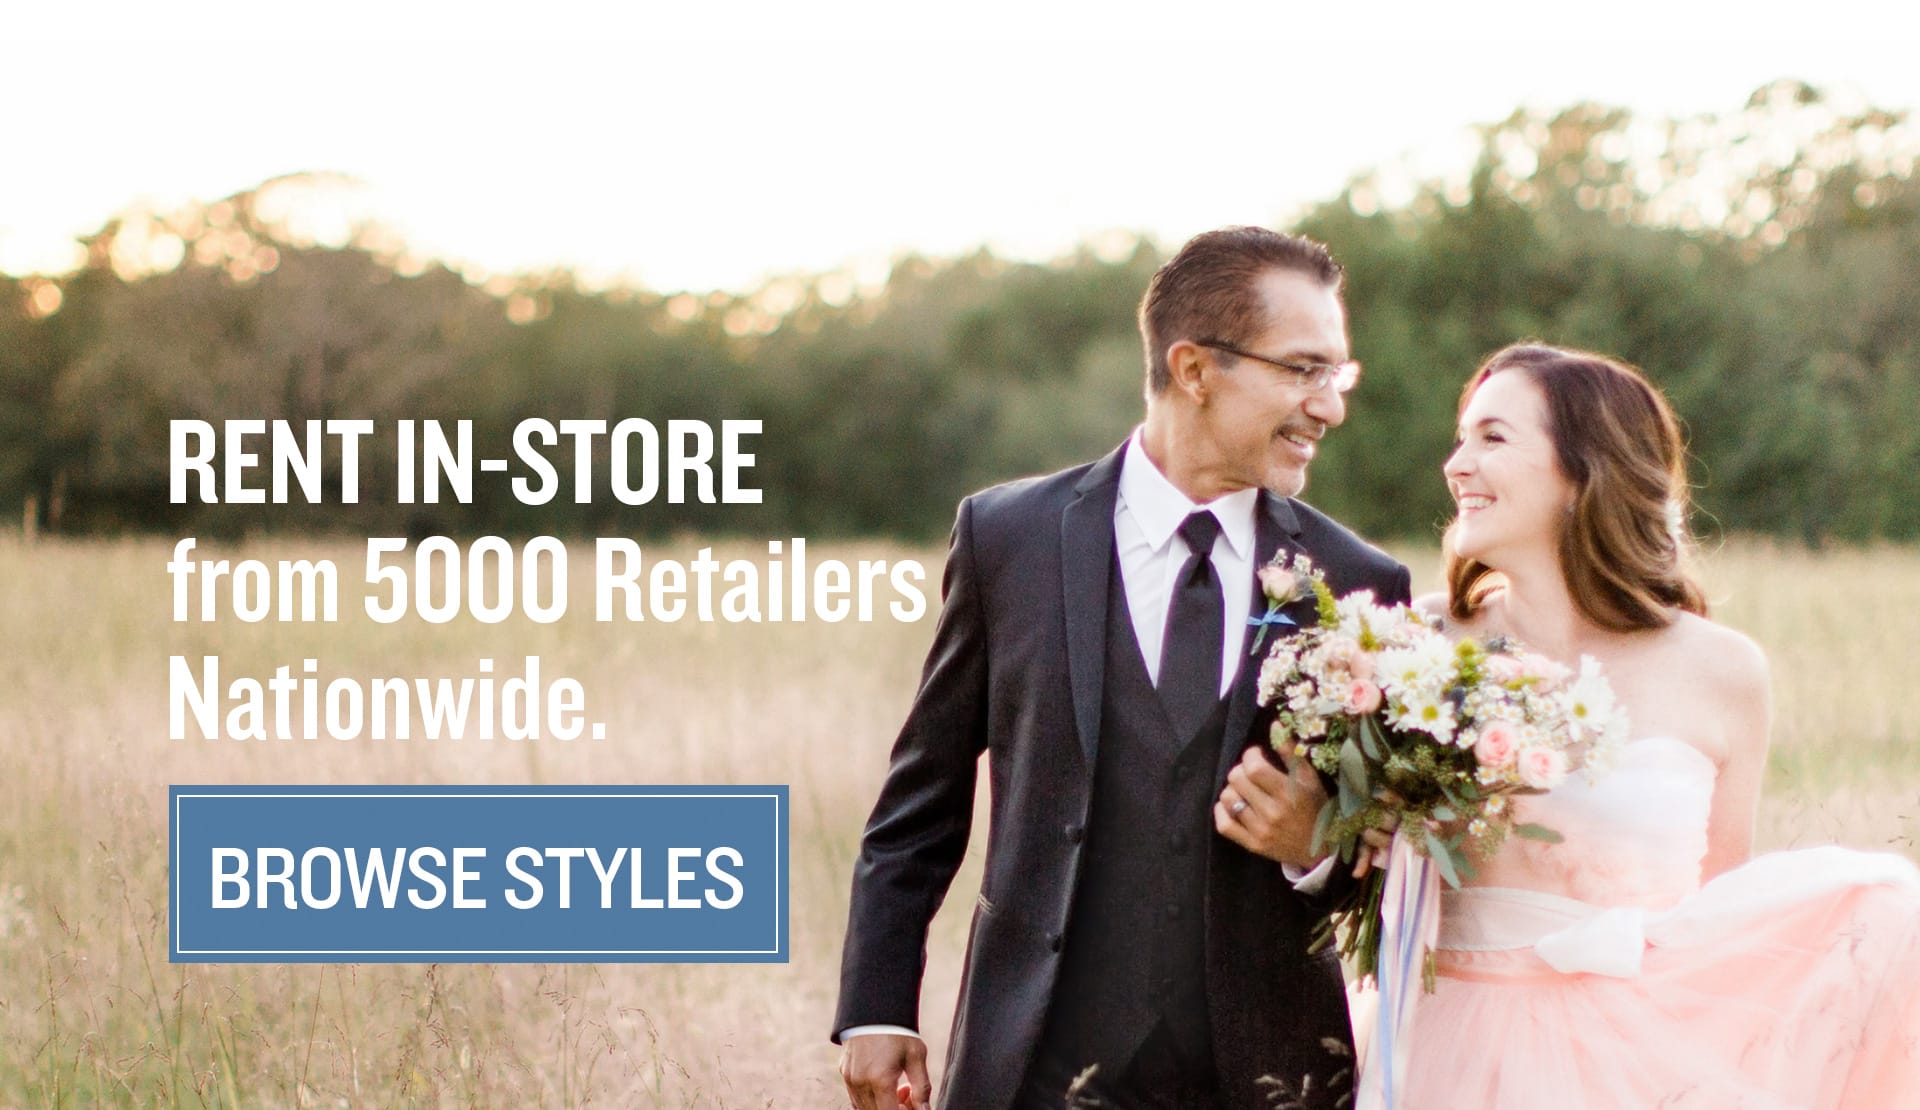 Browse our selection of tuxedos and suits for rental in-store.